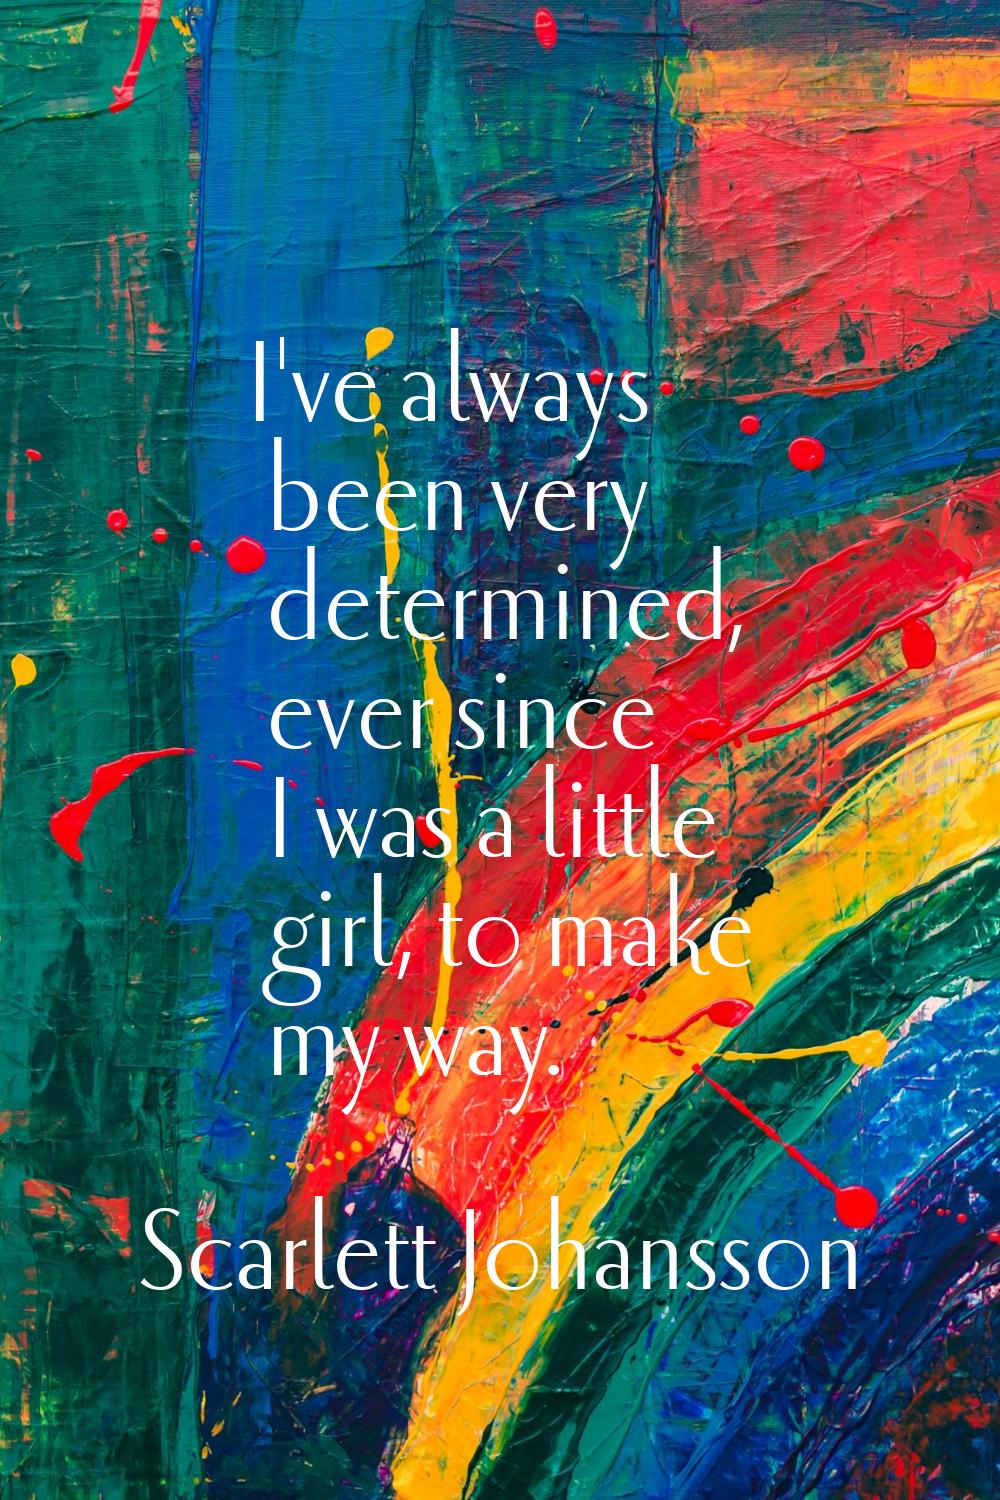 I've always been very determined, ever since I was a little girl, to make my way.